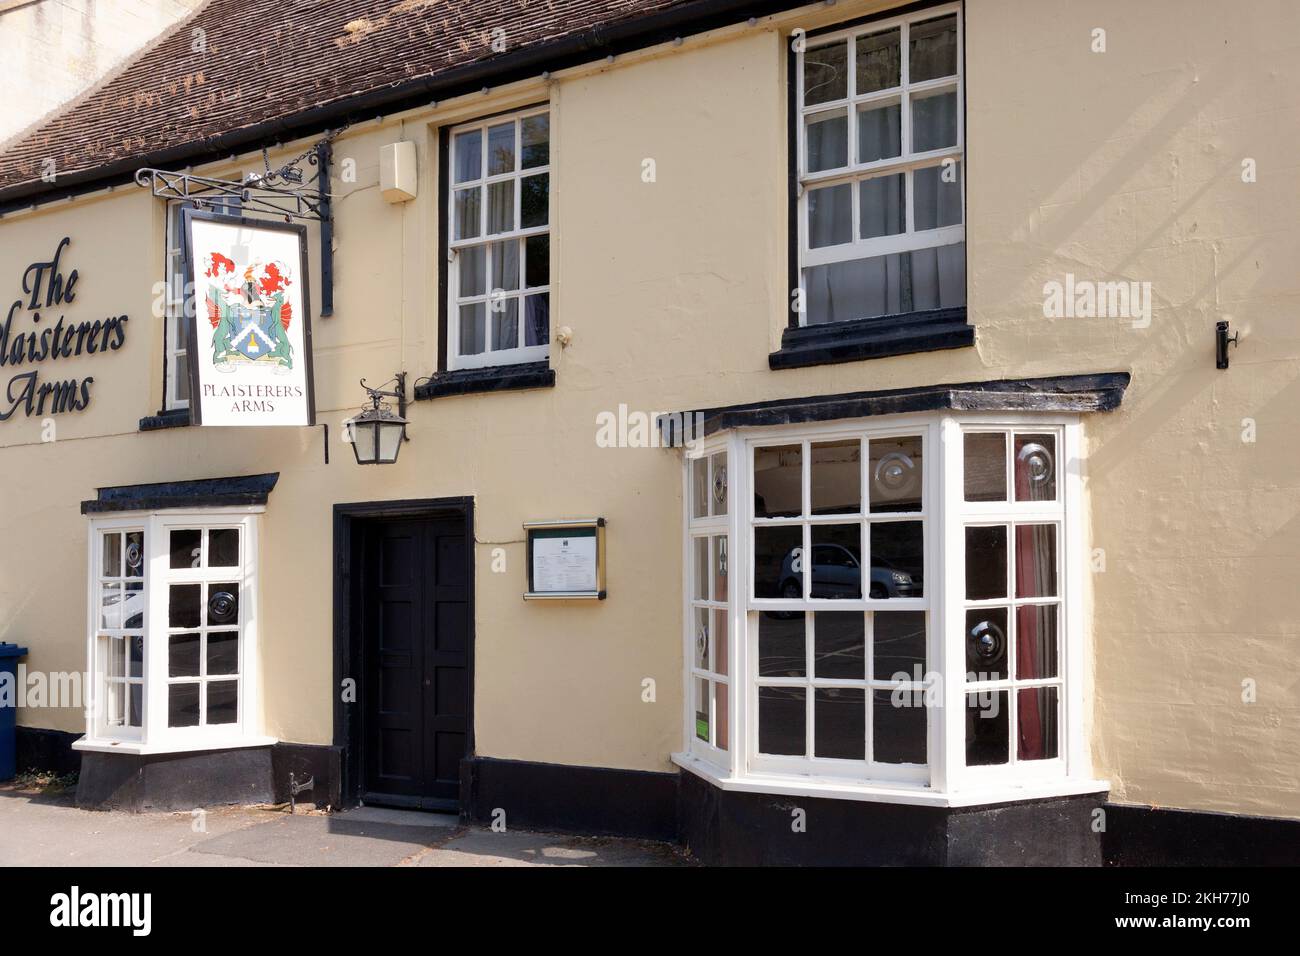 The Plaisterers Arms, Winchcombe, Glouchestershire Banque D'Images